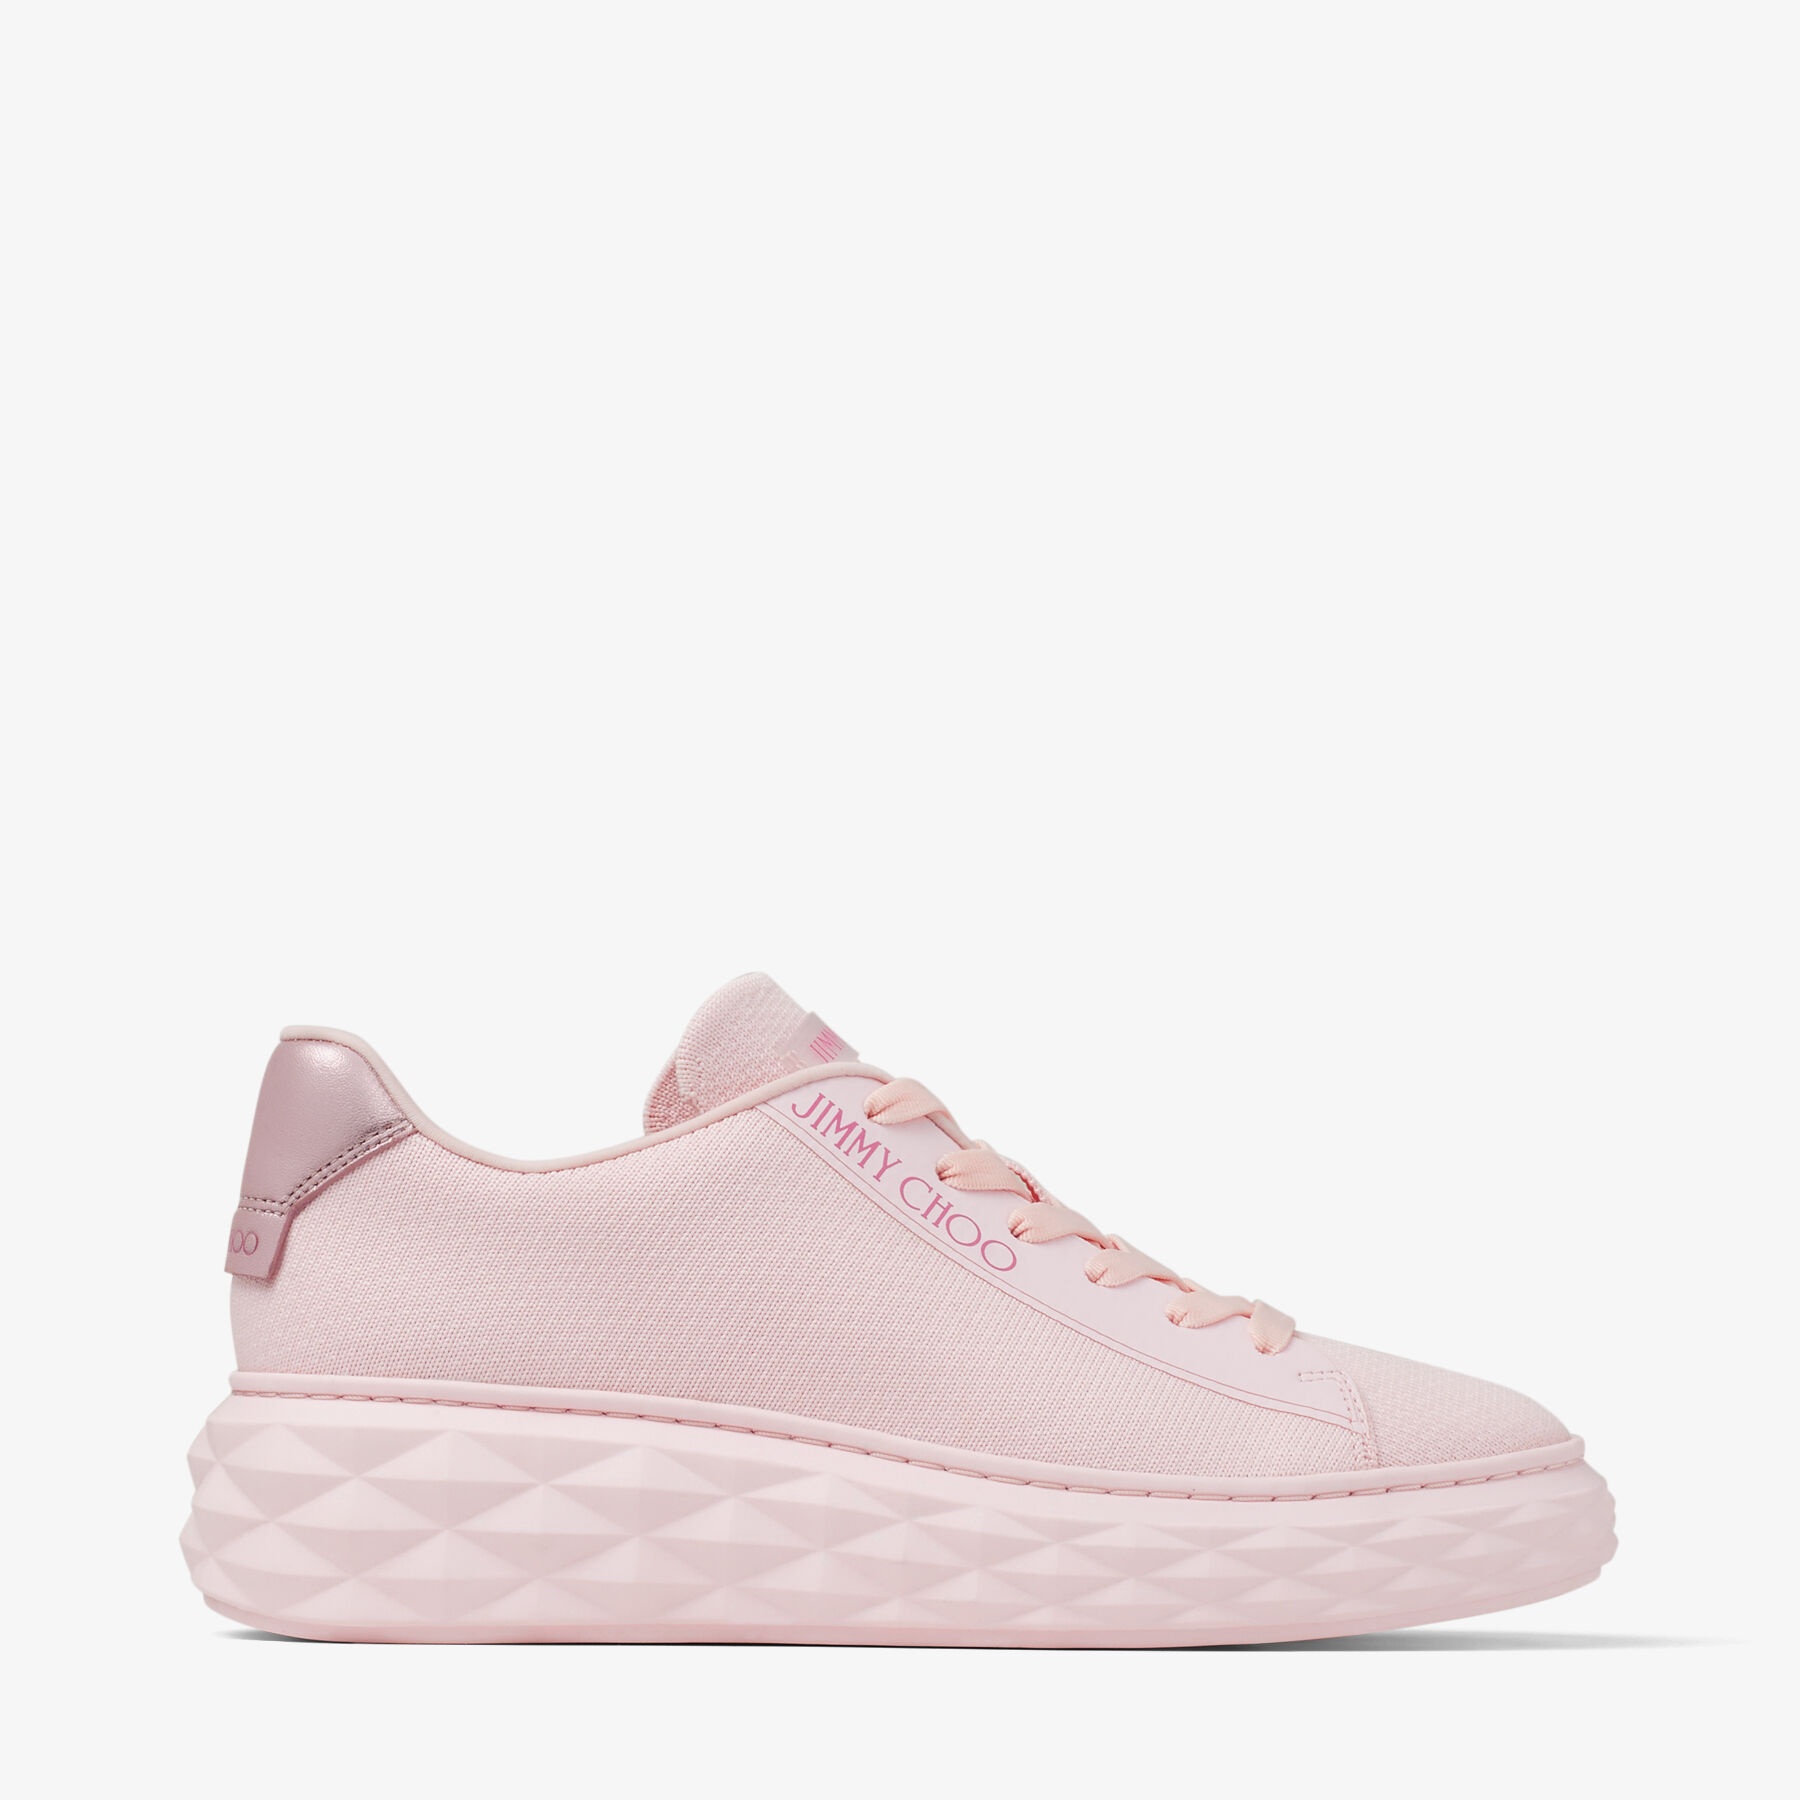 Diamond Light Maxi/f
Powder Pink Knit Low-Top Trainers with Platform Sole - 1